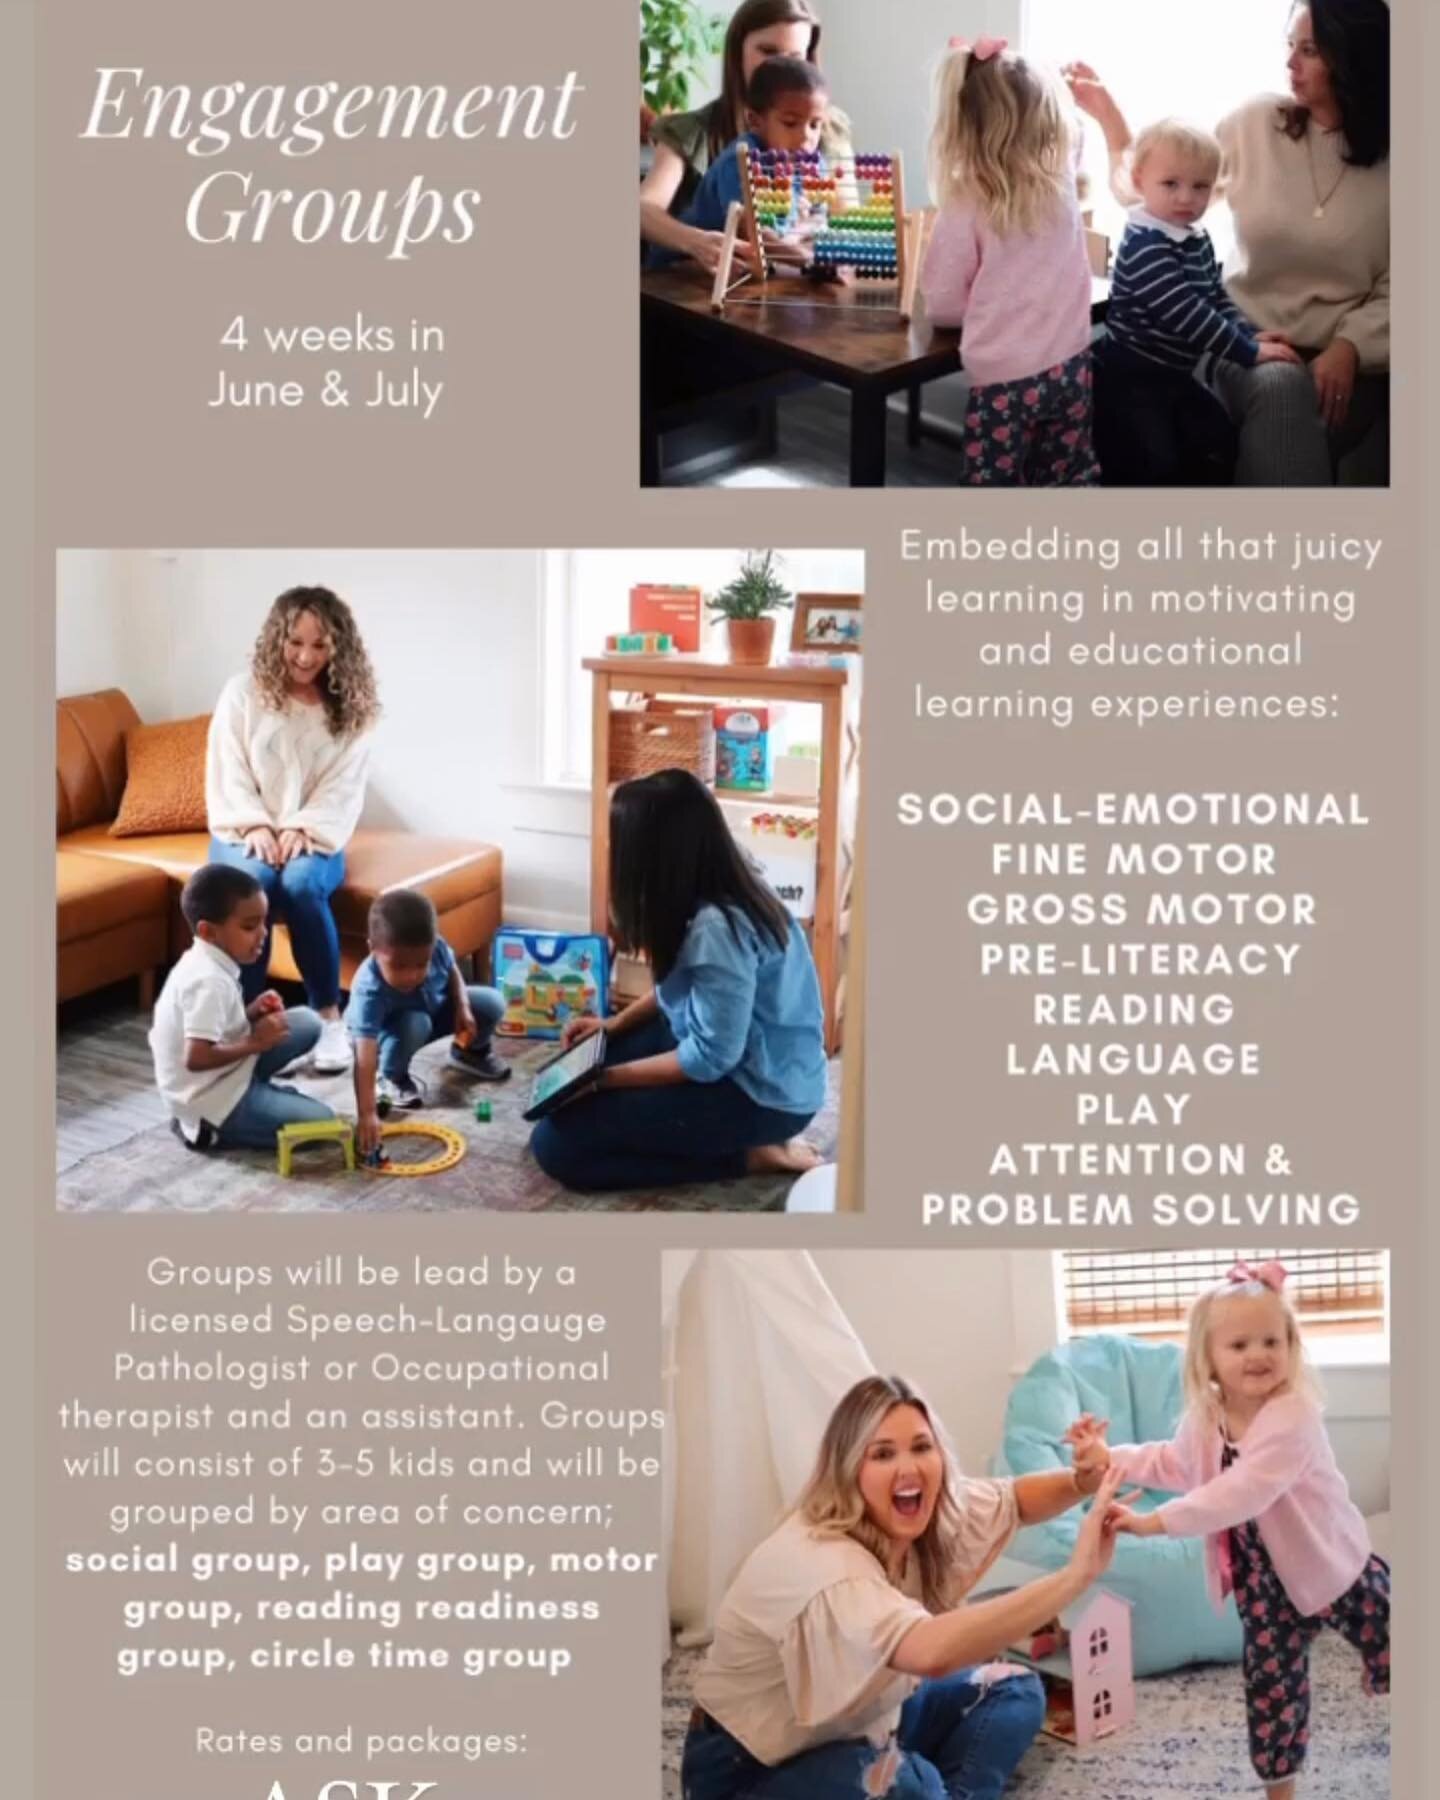 Summer is here so soon and we are bringing back our summer engagement groups! ☀️ 

Our themed groups will run in June and July and have unique activities to address engagement, language, motor, school readiness, and social skills 🎨🧩

Please contact